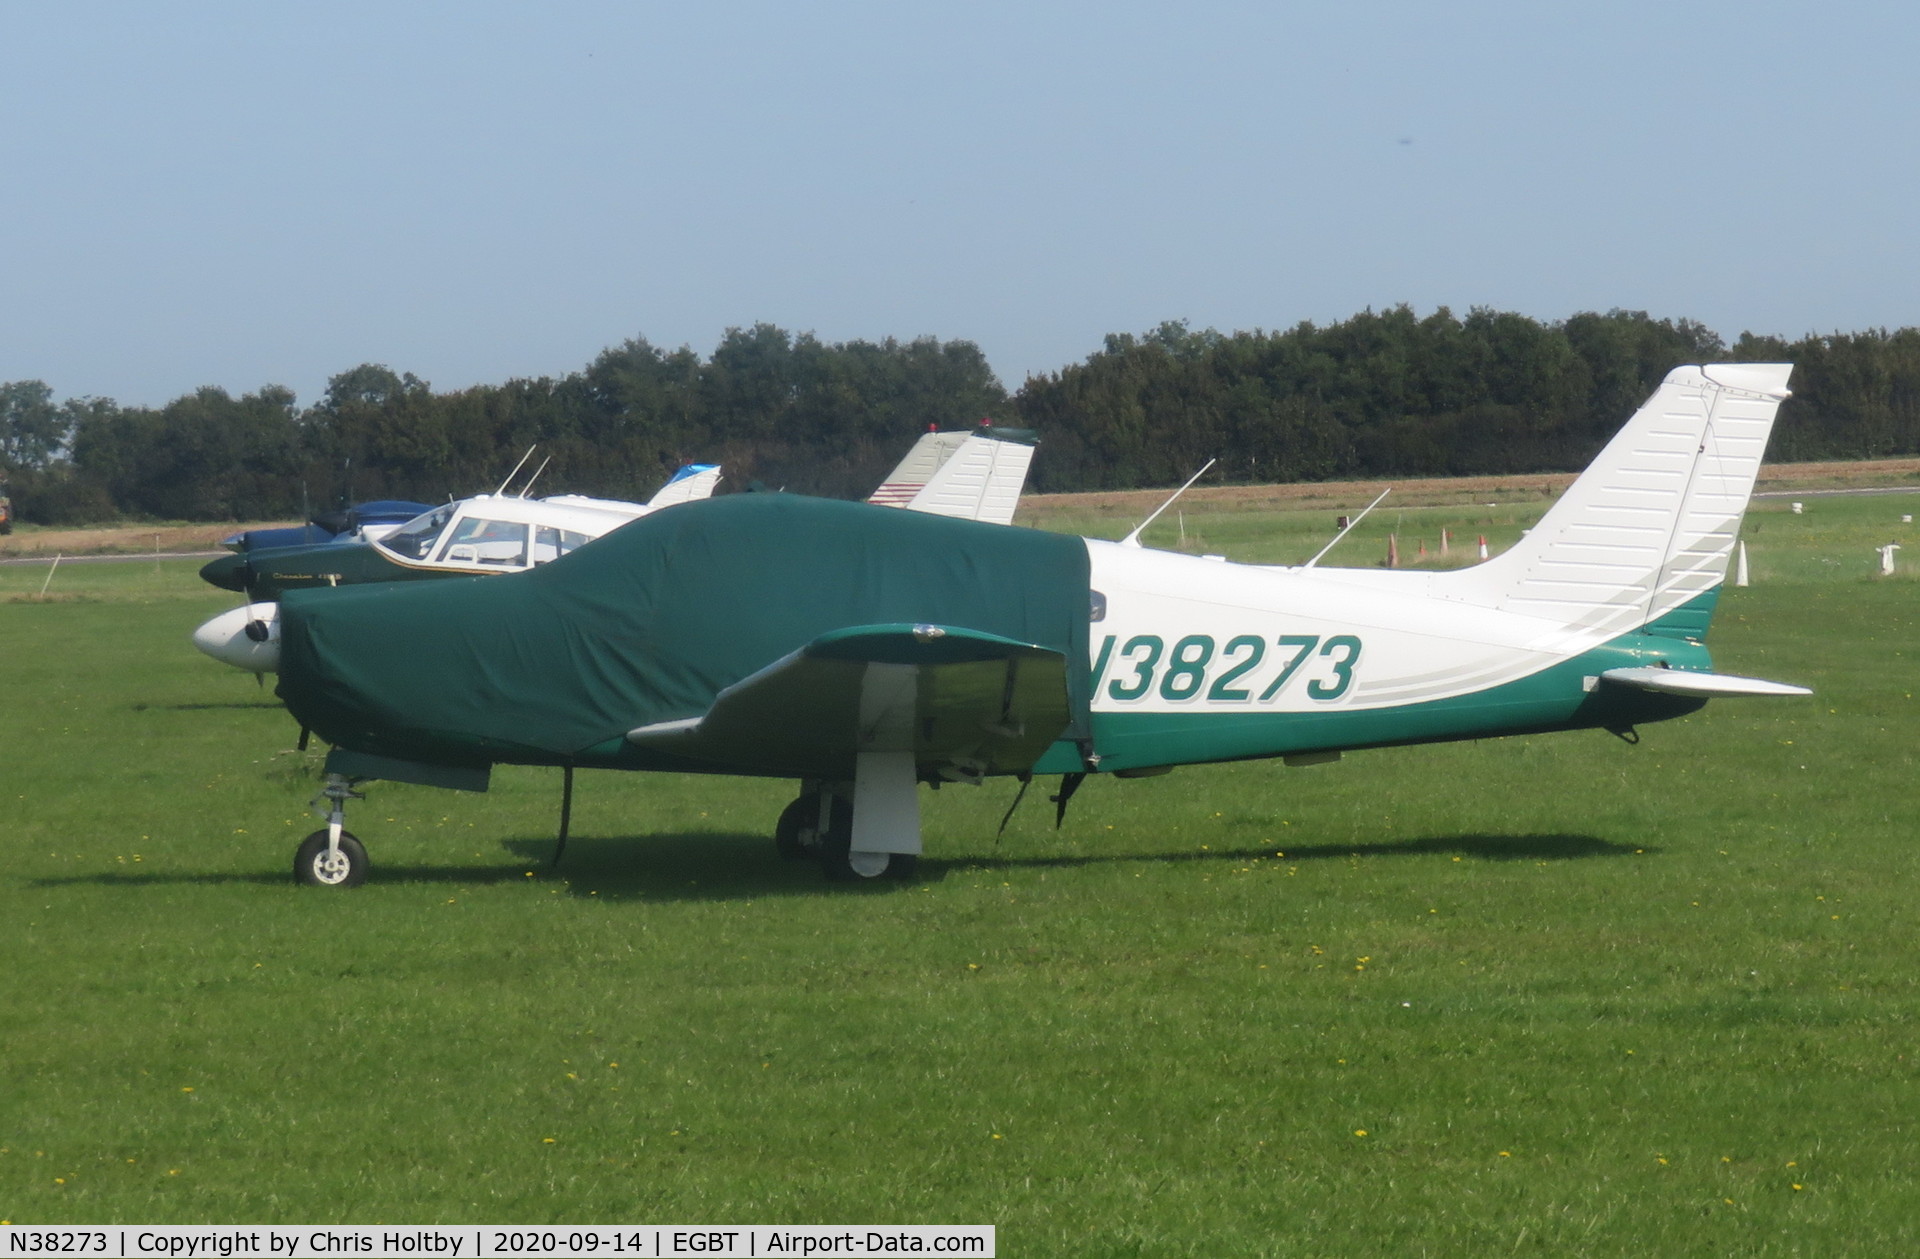 N38273, 1977 Piper PA-28R-201 Cherokee Arrow III C/N 28R-7737086, Parked and under cover at Turweston, Bucks